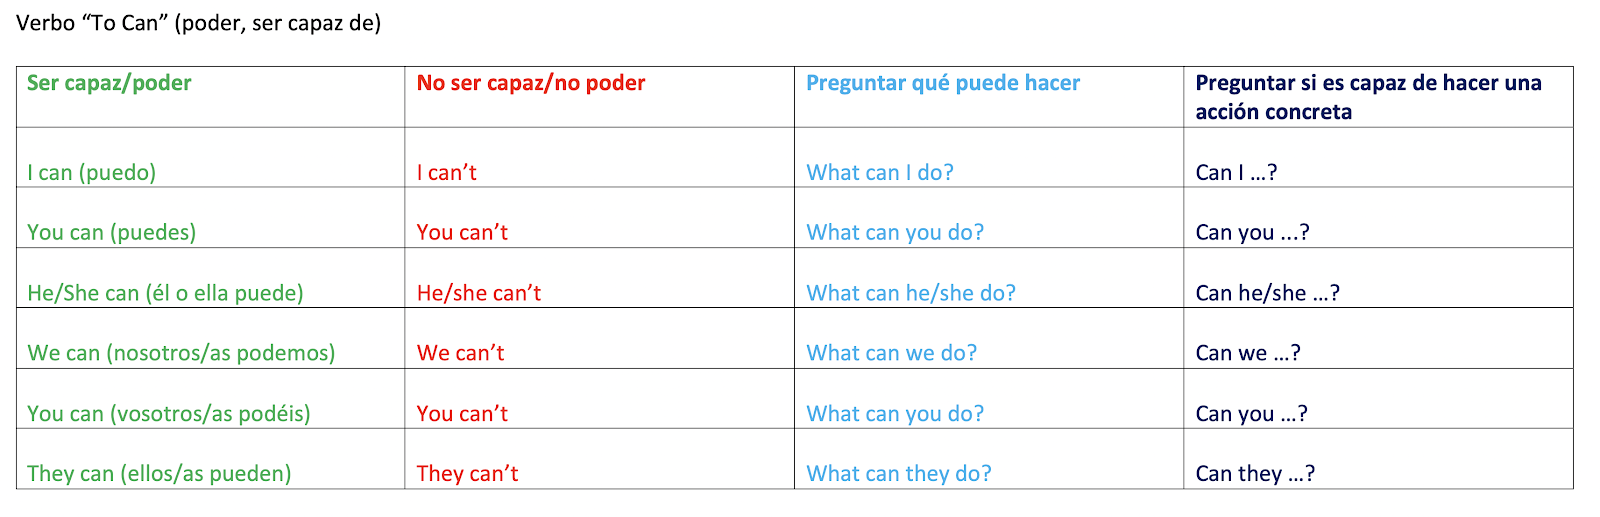 VERBO "TO CAN" (poder, ser capaz)